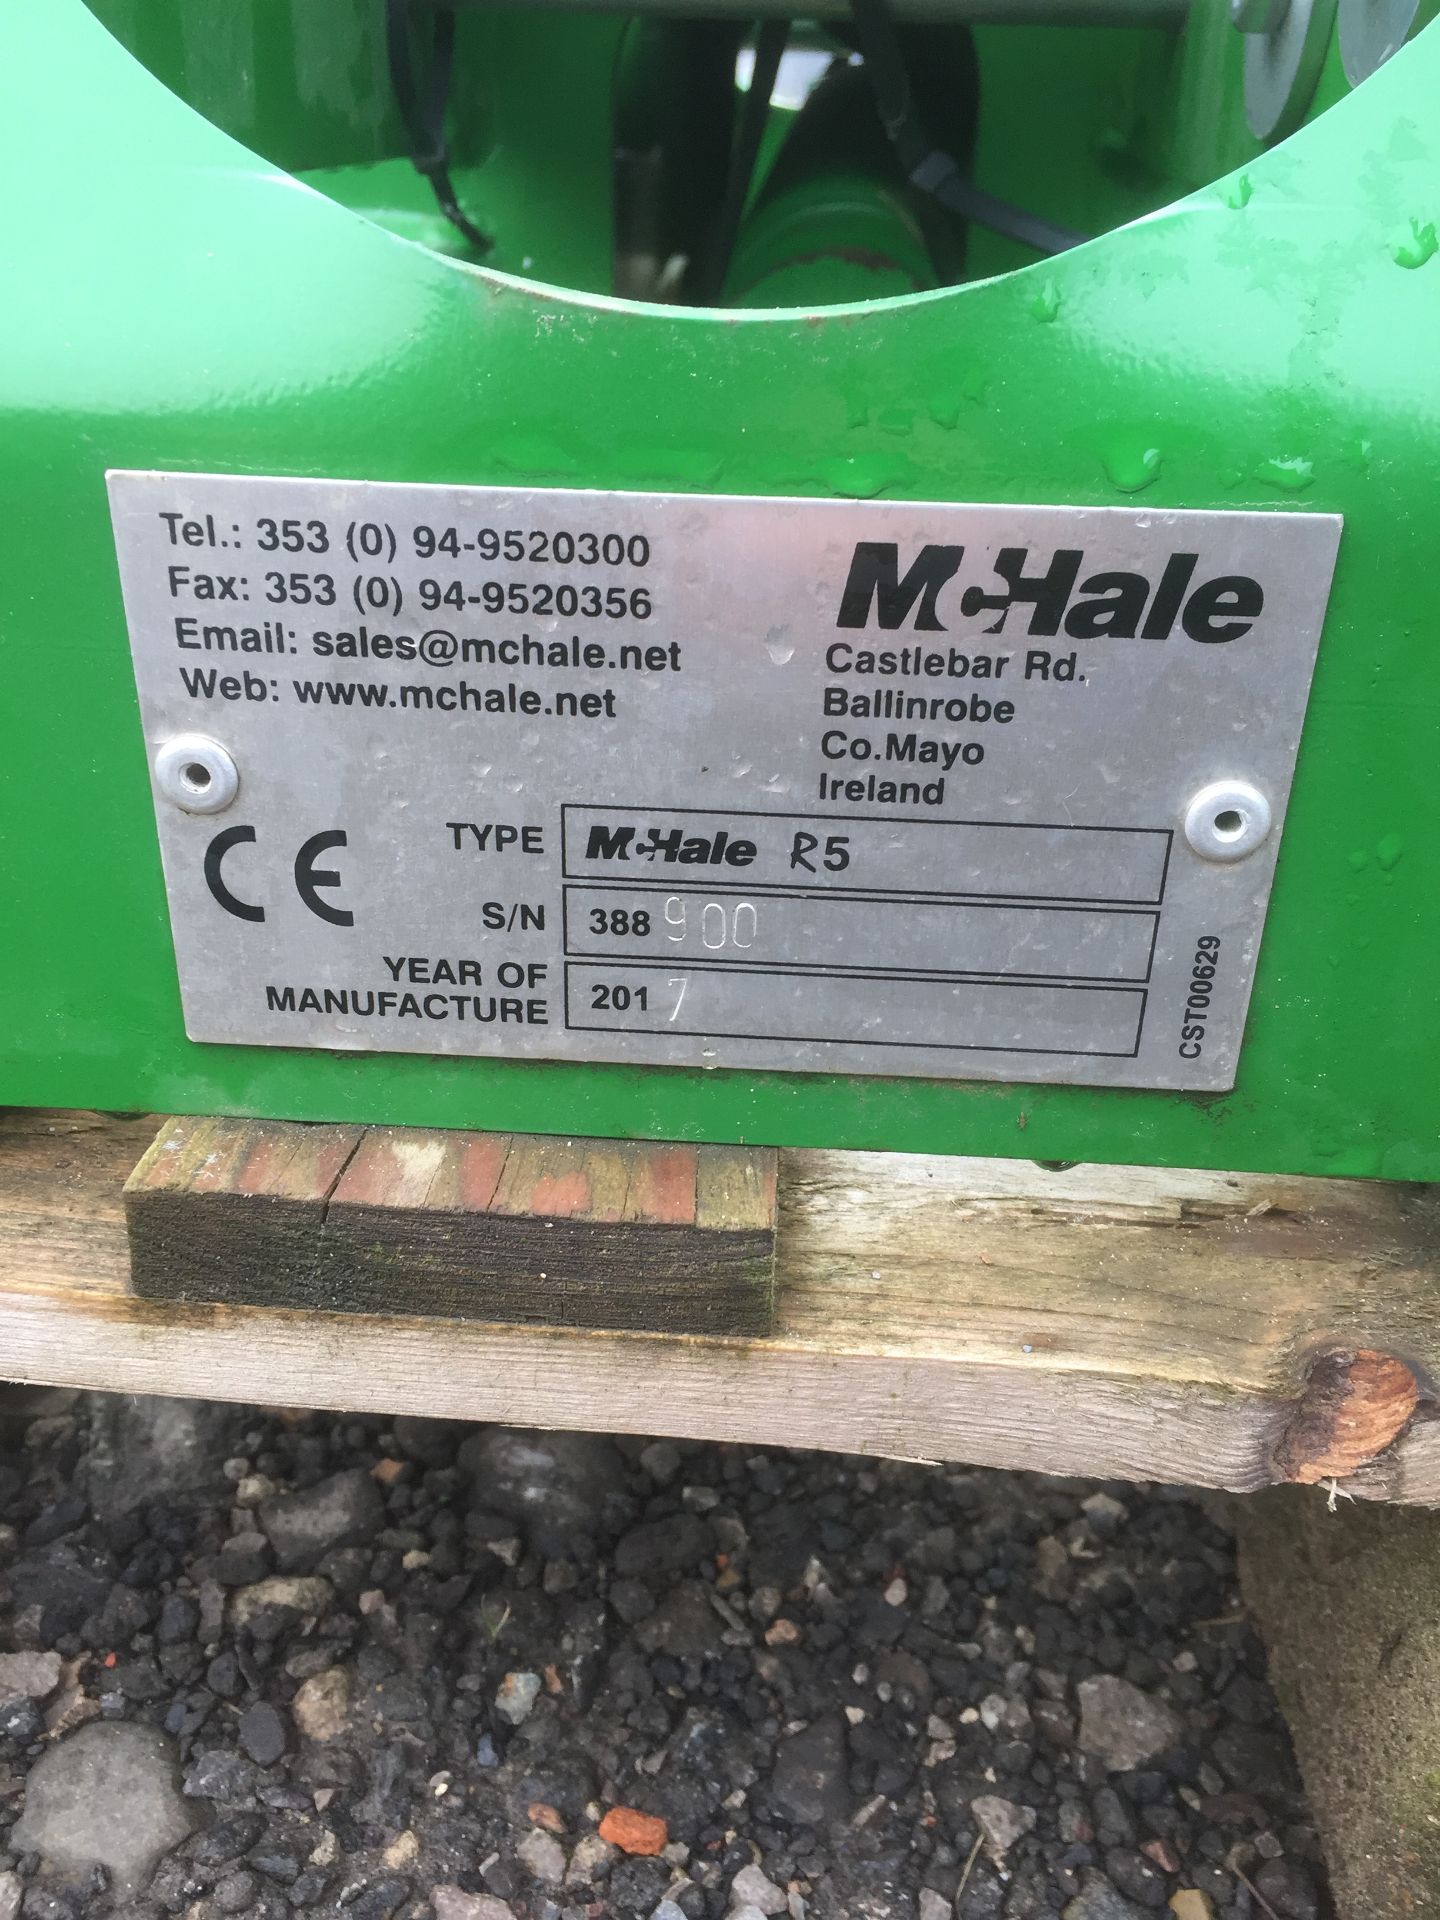 McHale softhands R5 round bale handler (unused), Serial No. 388900 (2017) - Image 3 of 3